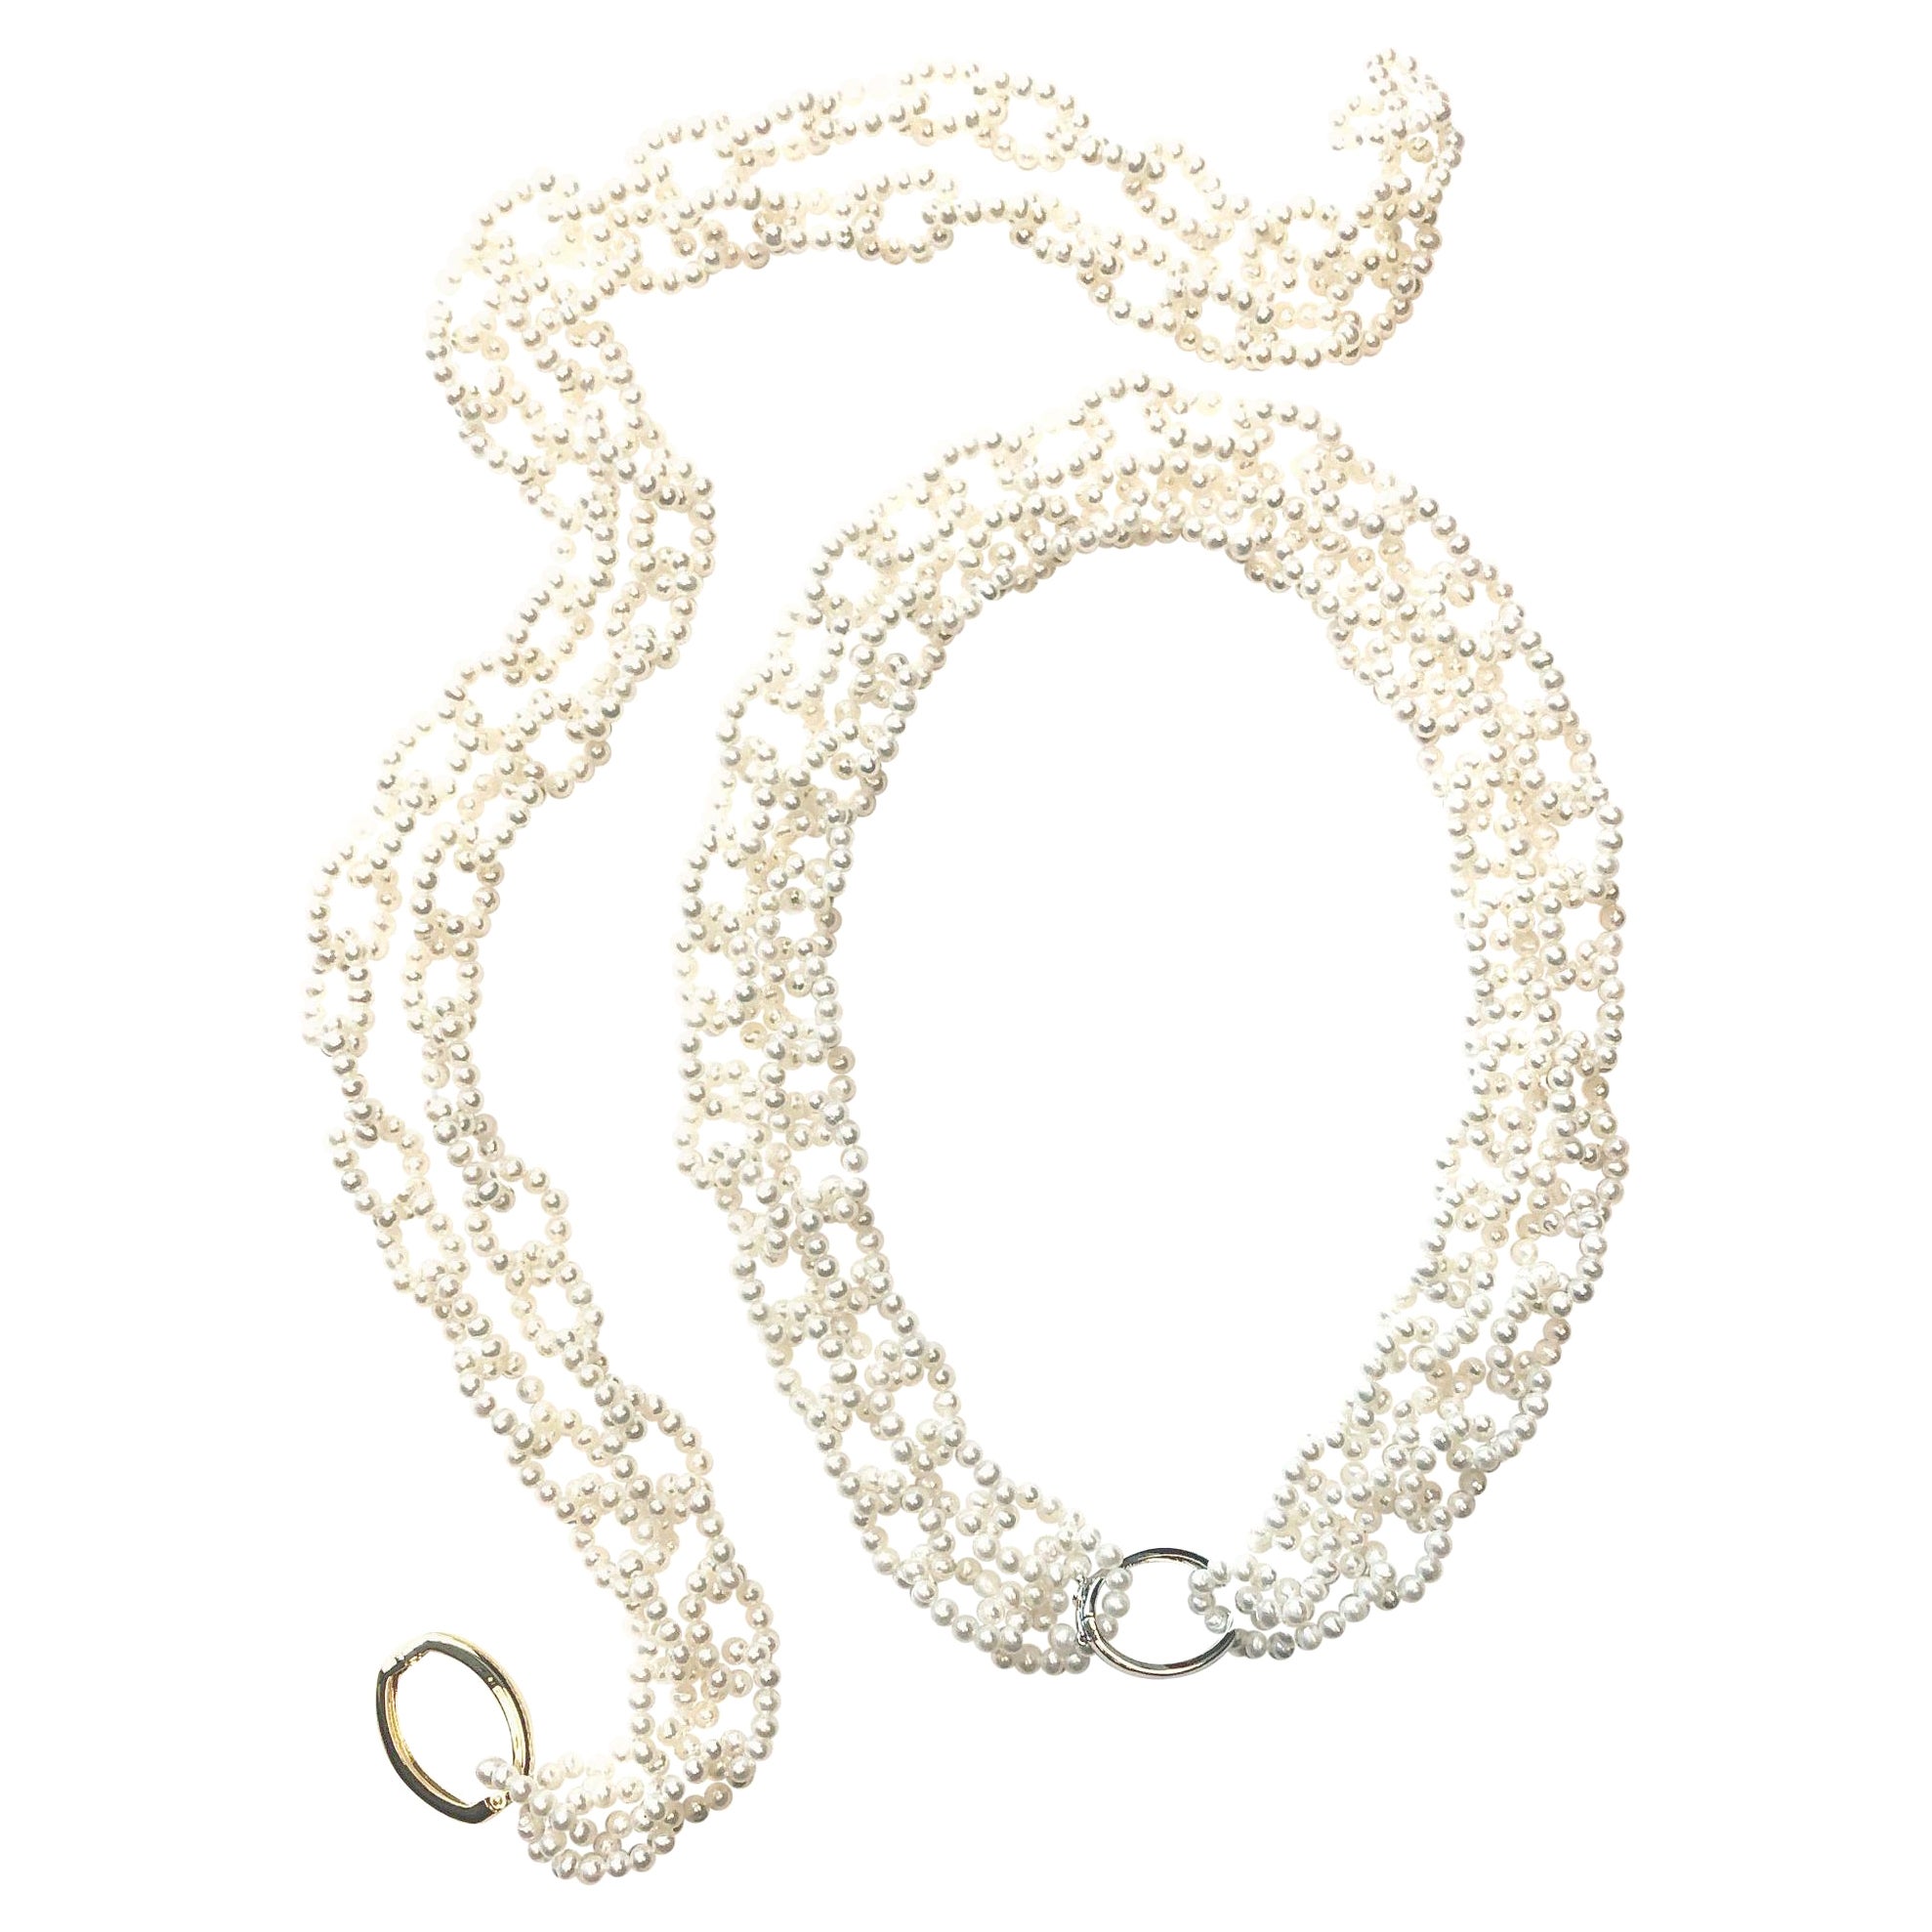 36-Inch White Pearl "Open Chain Link" Necklace with Silver Toned Clasp For Sale